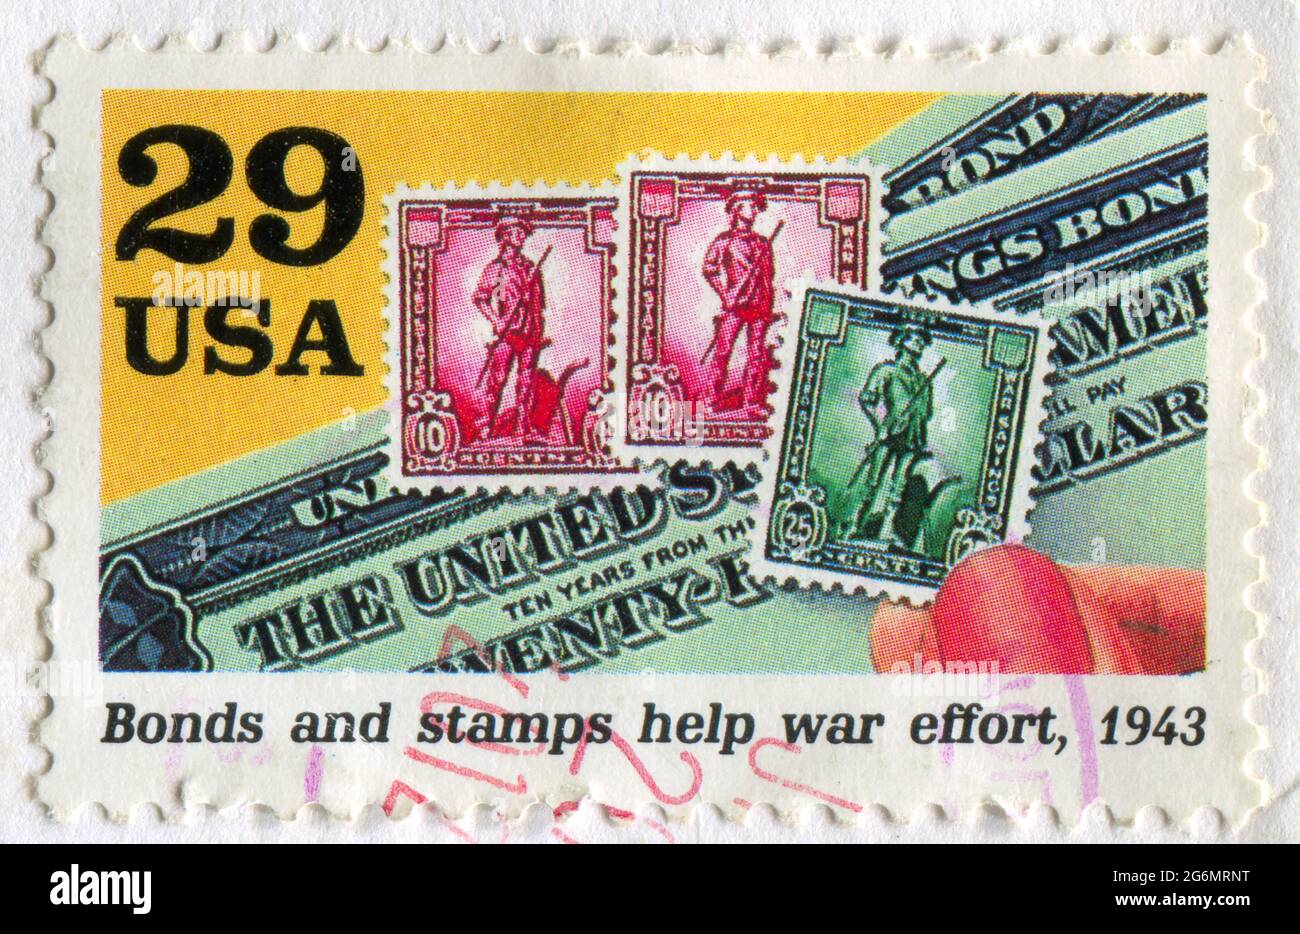 UNITED STATES - CIRCA 1993: stamp printed by United States, shows Bonds and stamps help war effort, circa 1993 Stock Photo